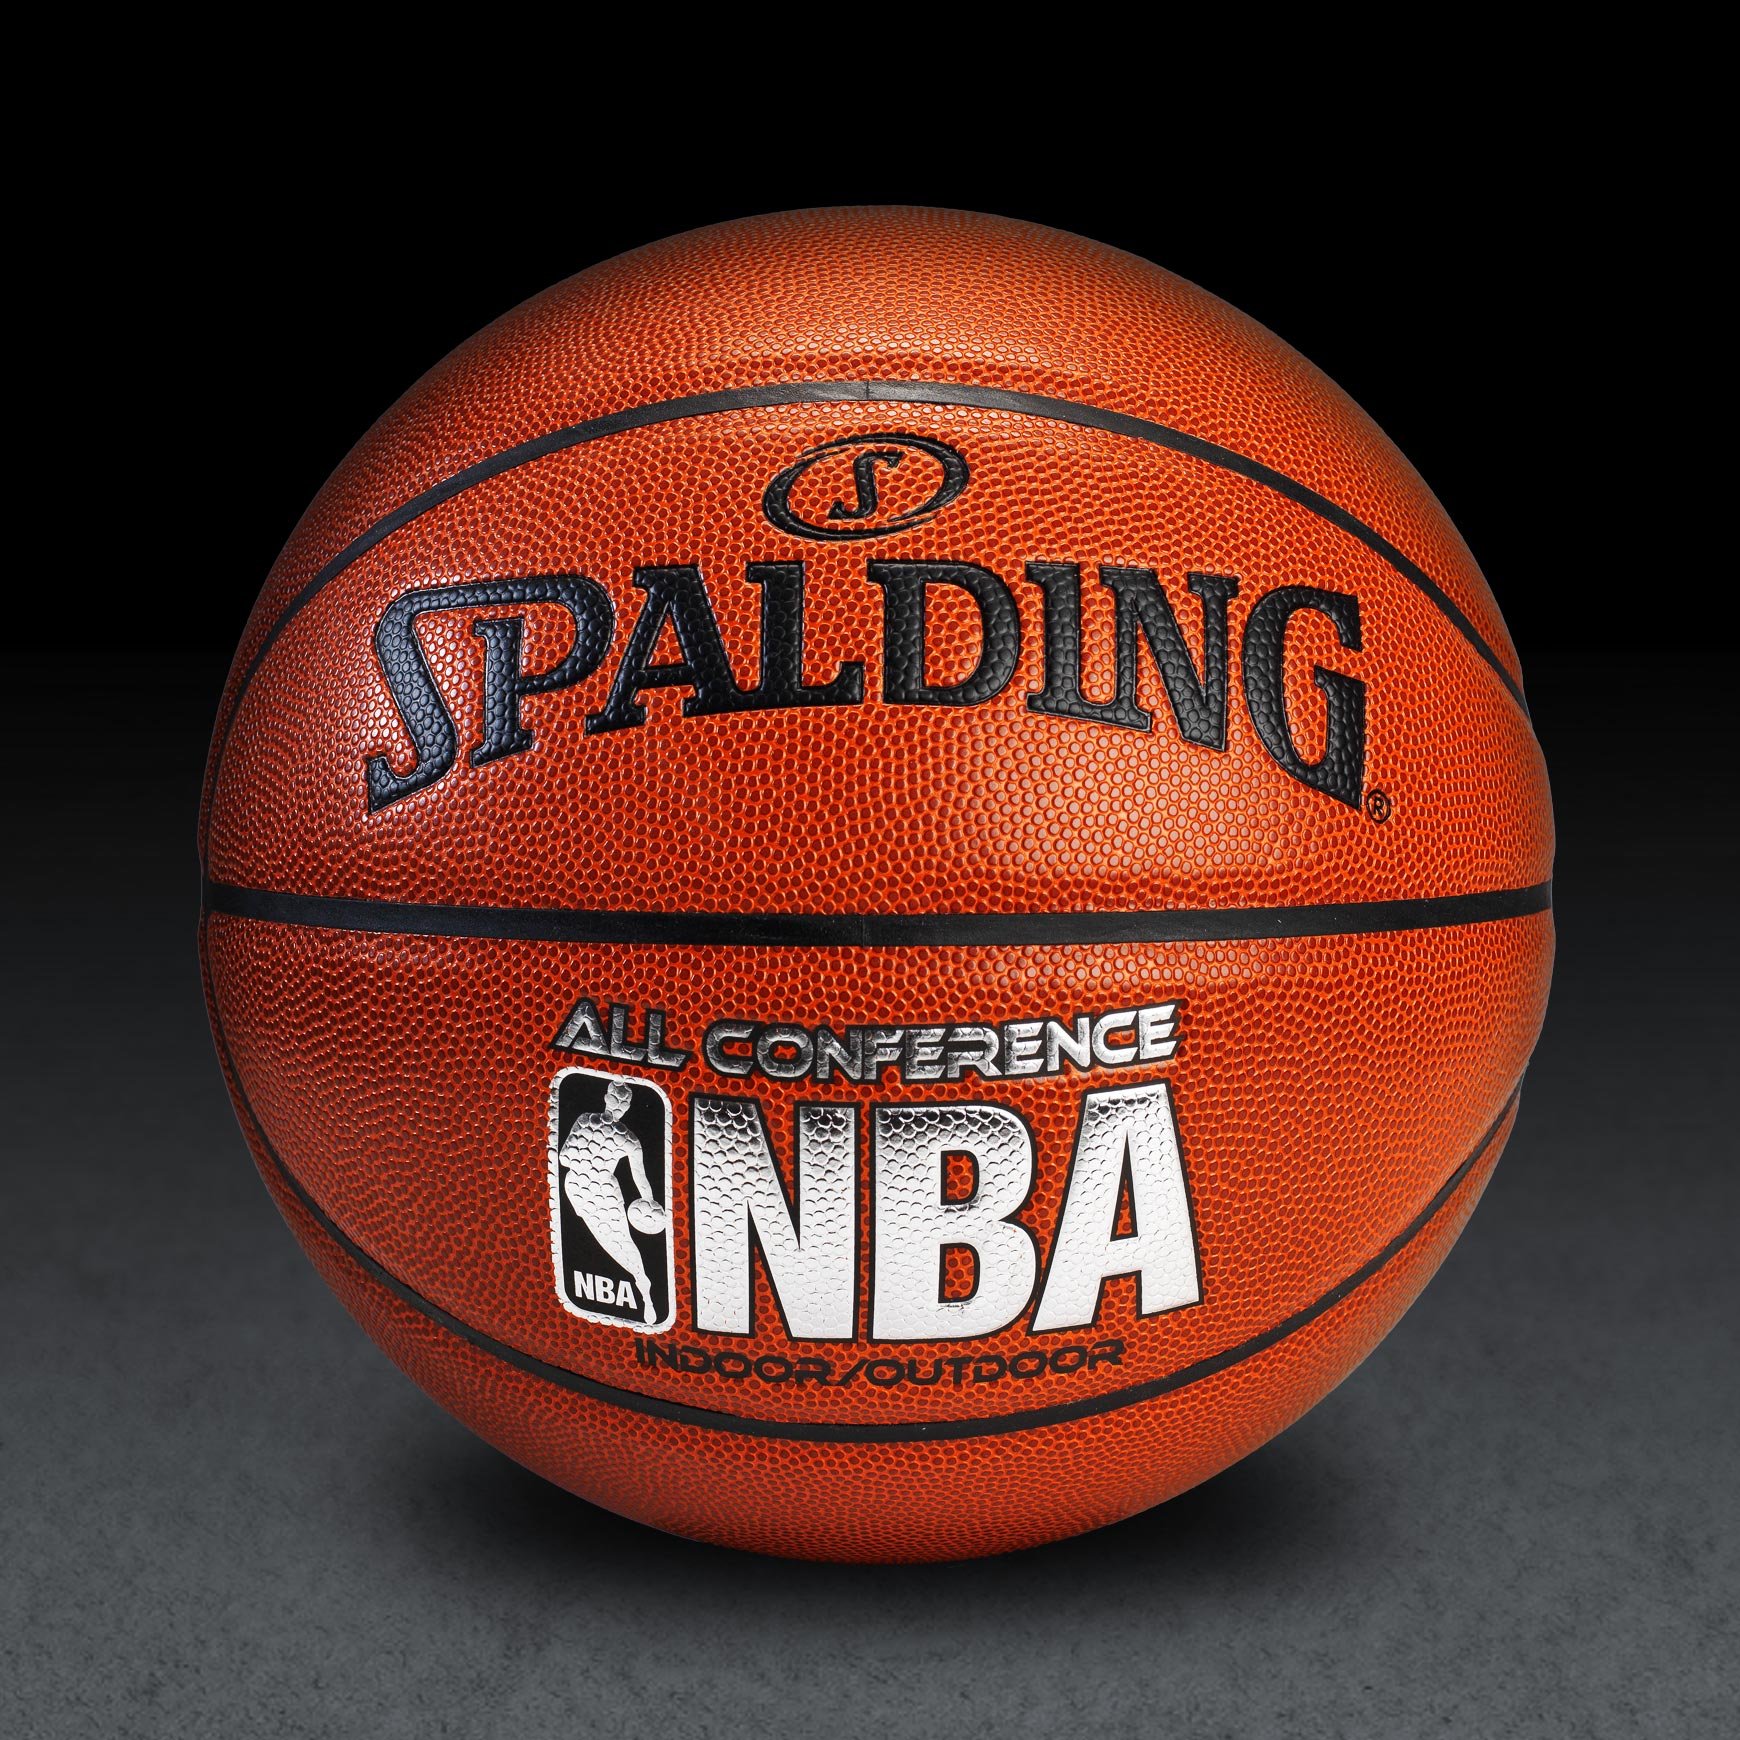 Free Basketball, Download Free Clip Art, Free Clip Art on.